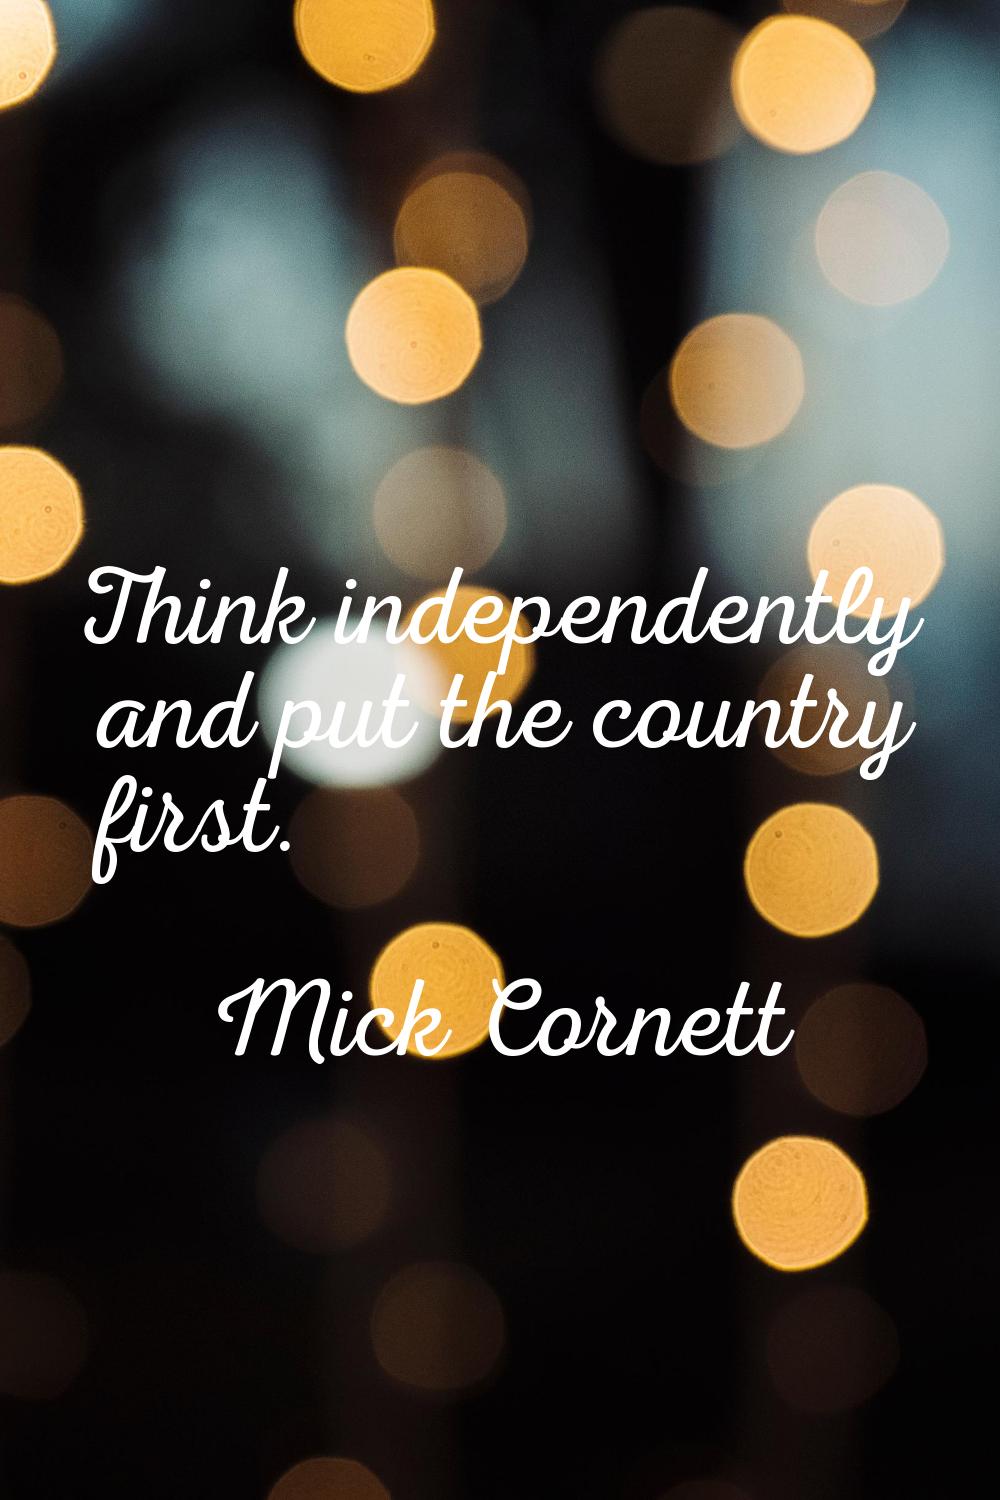 Think independently and put the country first.